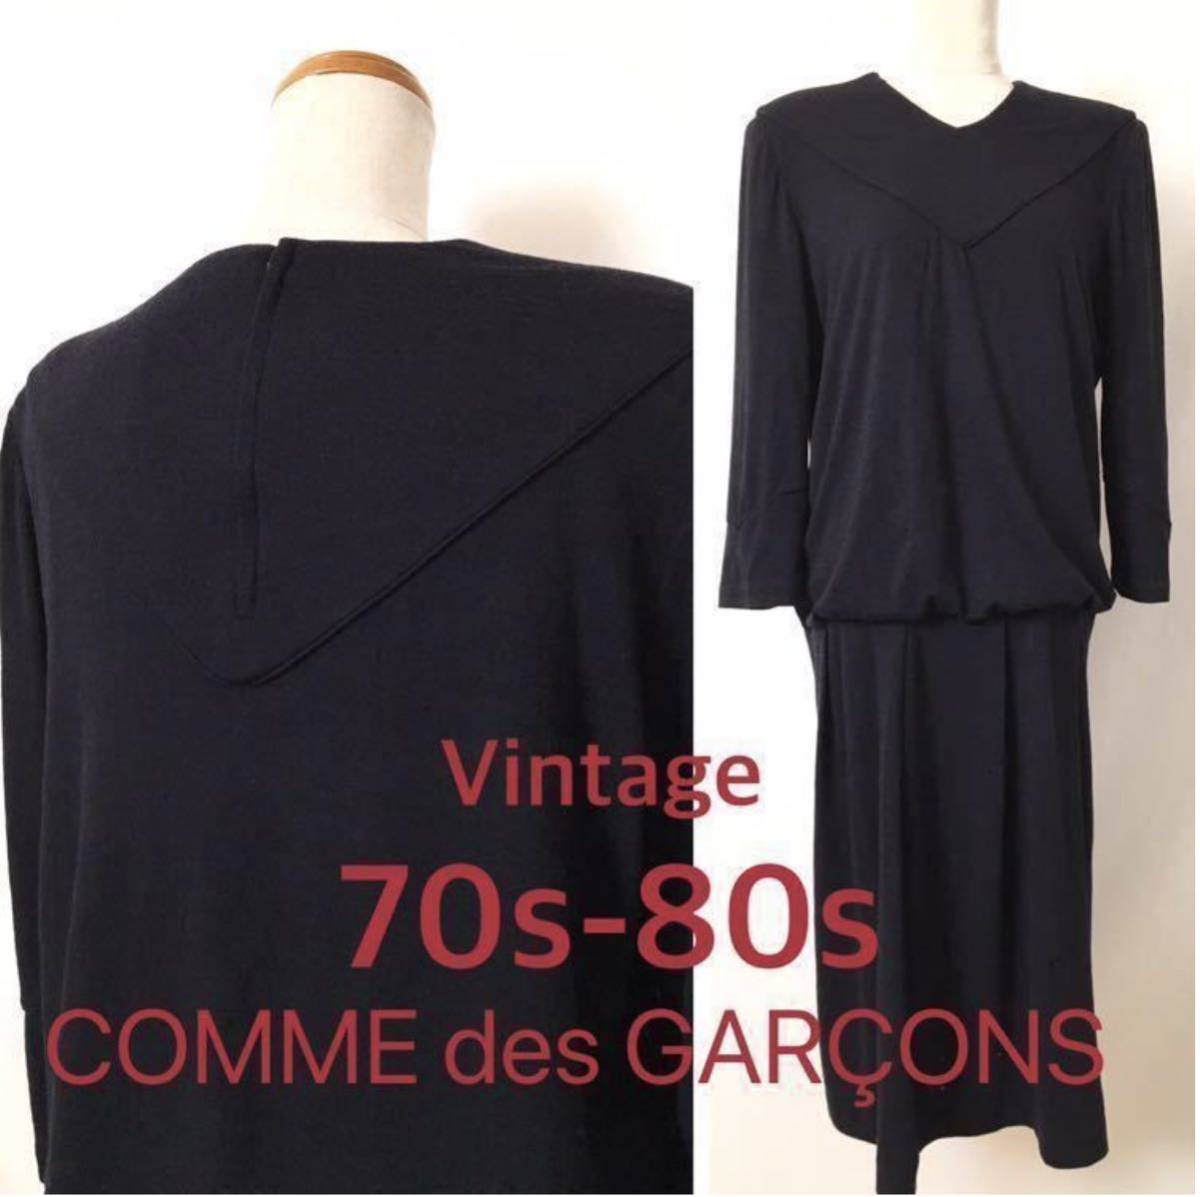 ●70s 80s [Vintage] 初期 黒の衝撃 ボロルックCOMME des GARCONS コムデギャルソン ヴィンテージ Archive アーカイブ 80年代 川久保玲_画像1